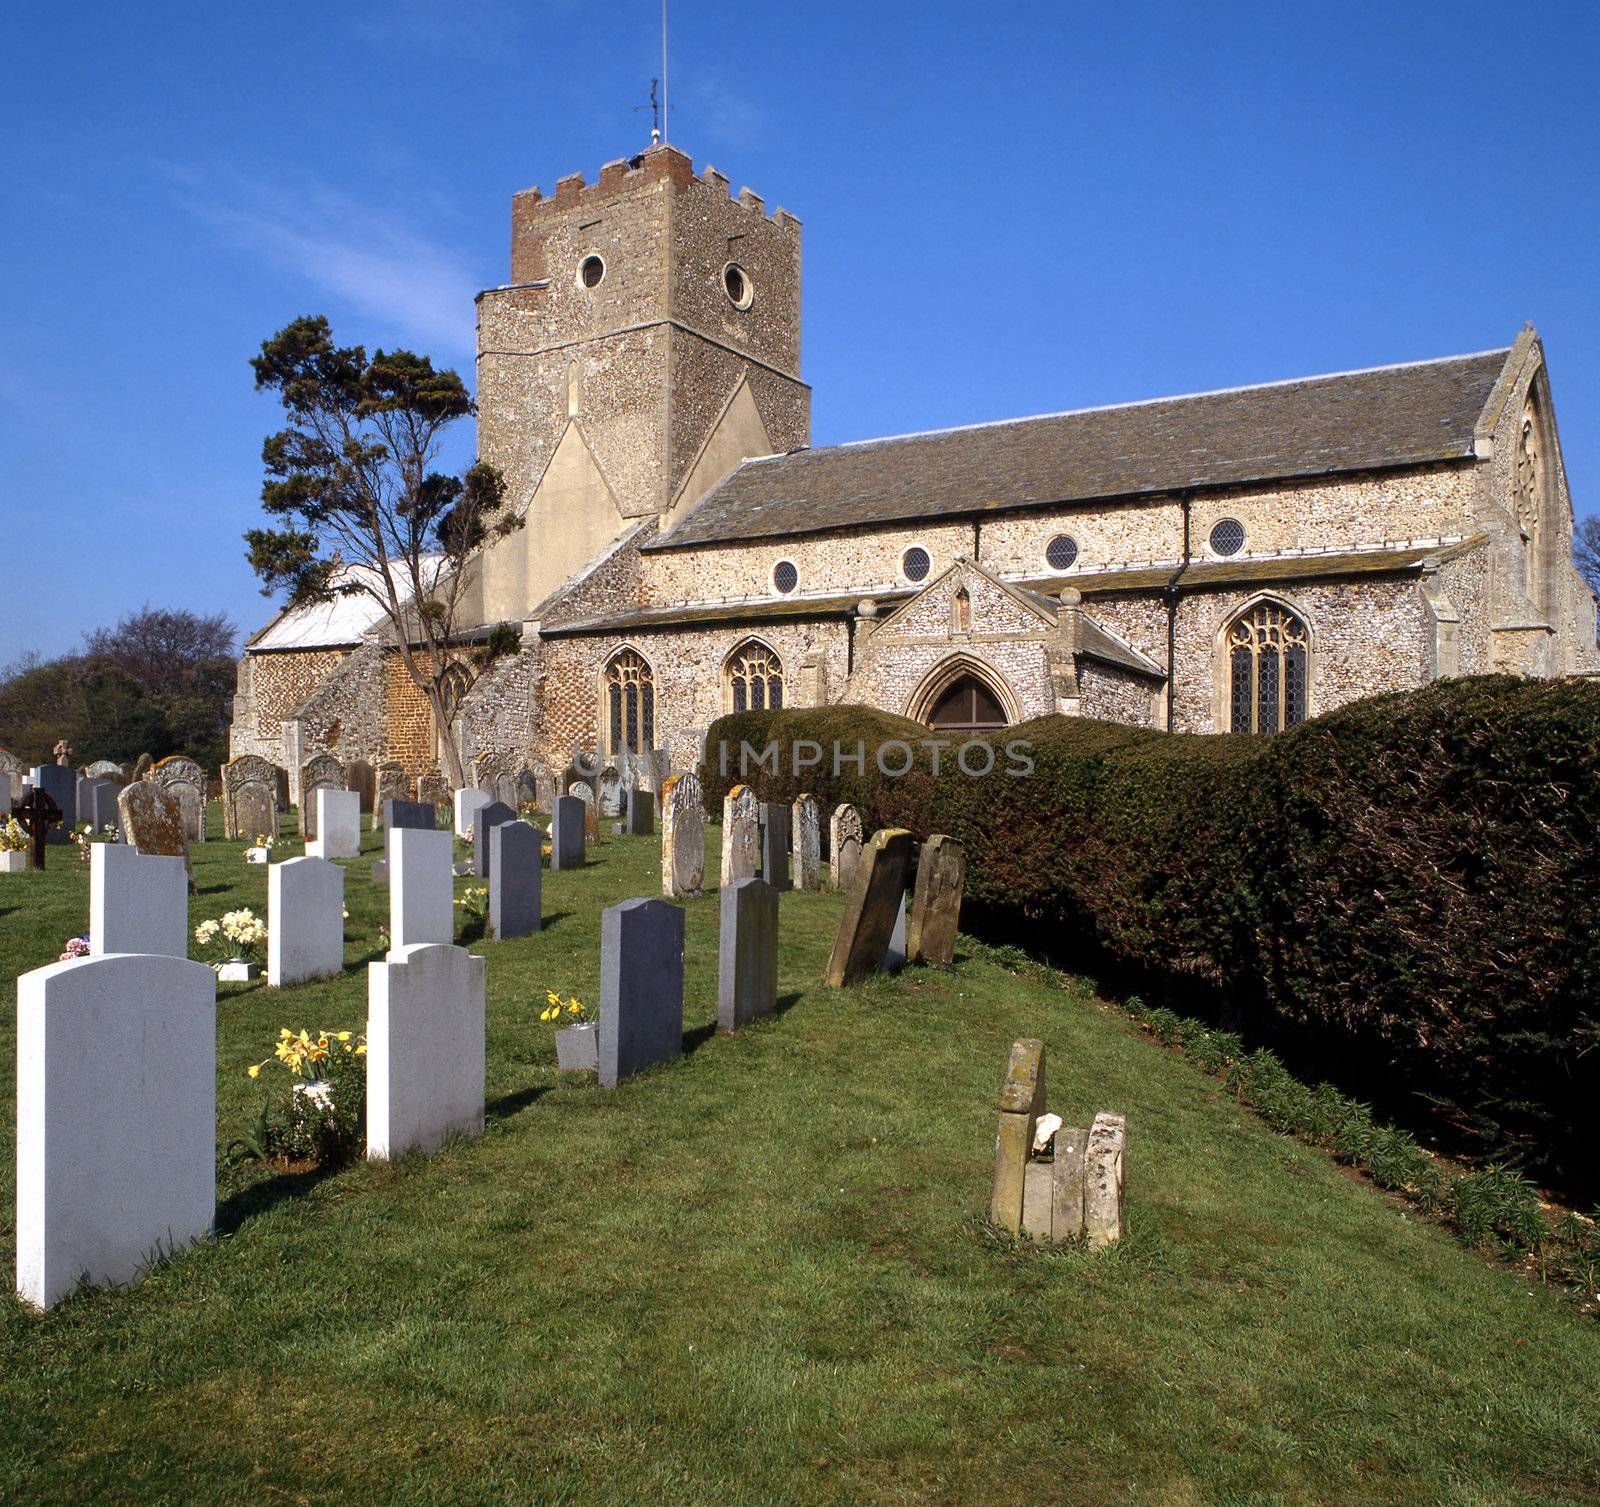 English church set in the country with graveyard and hedge leading to the entrance